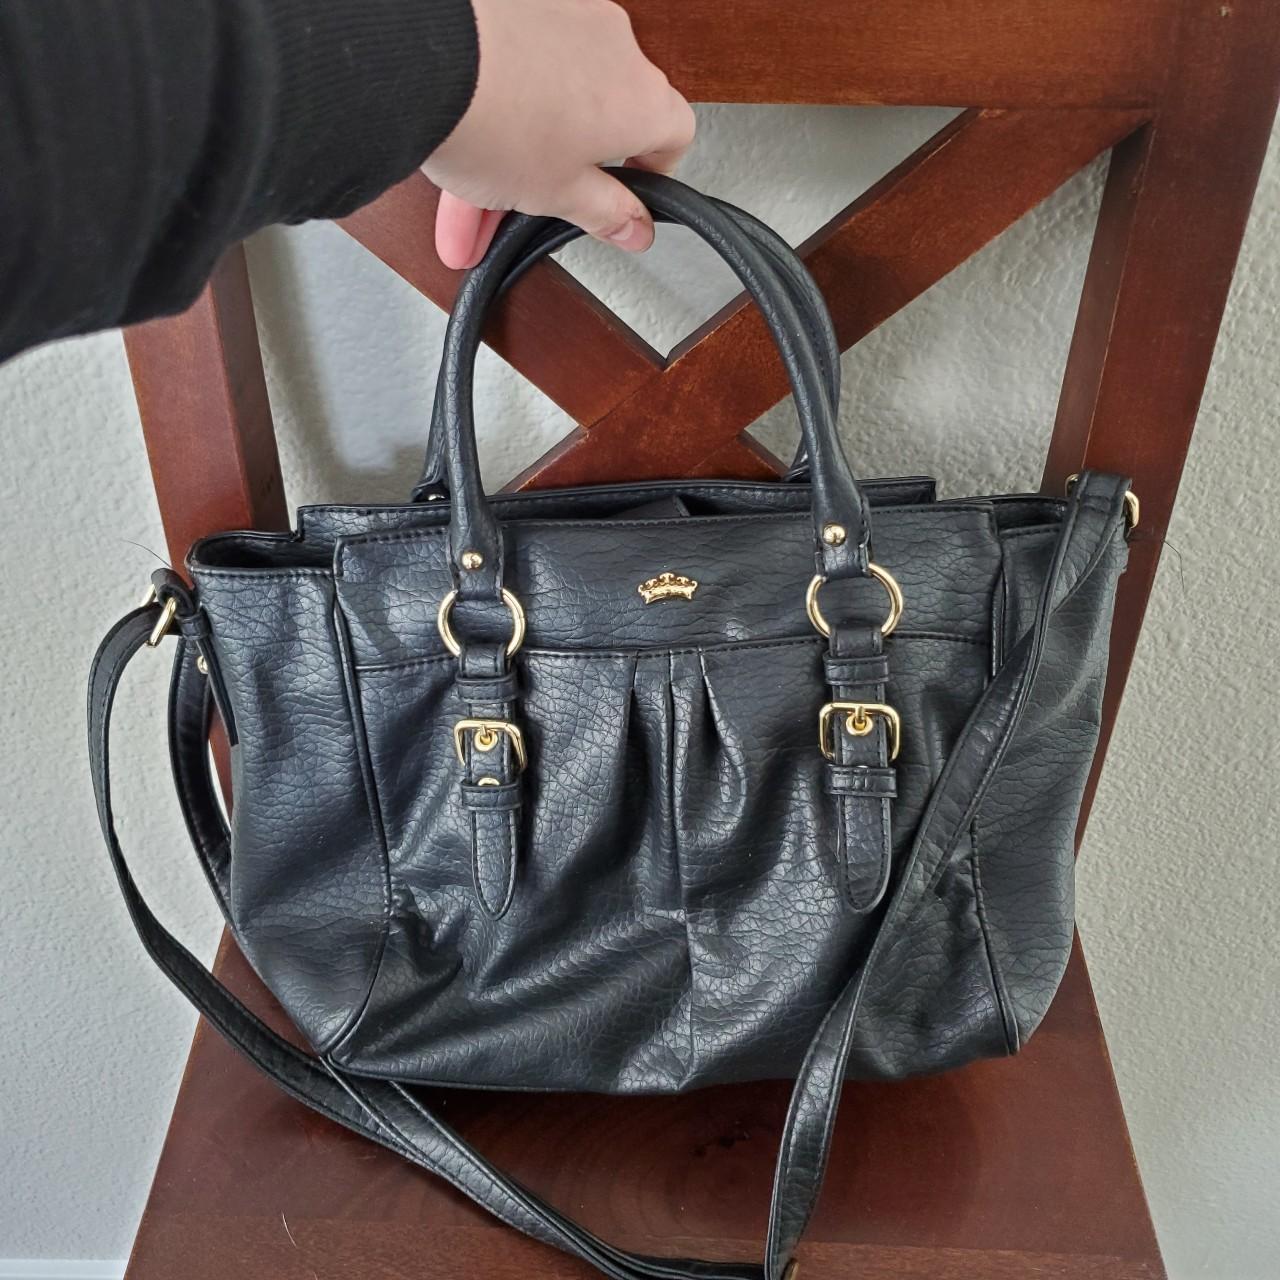 Juicy Couture Black Leather with Gold Hardware Bag Rare